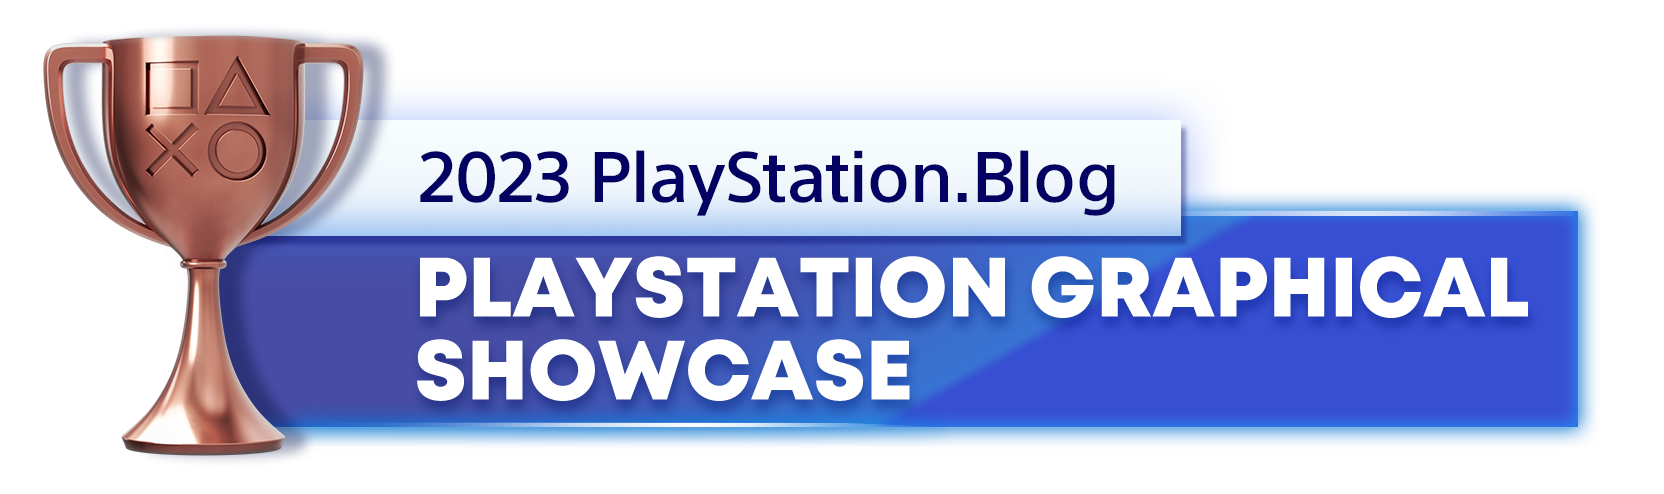  "Bronze Trophy for the 2023 PlayStation Blog PlayStation Best Graphical Showcase Winner"